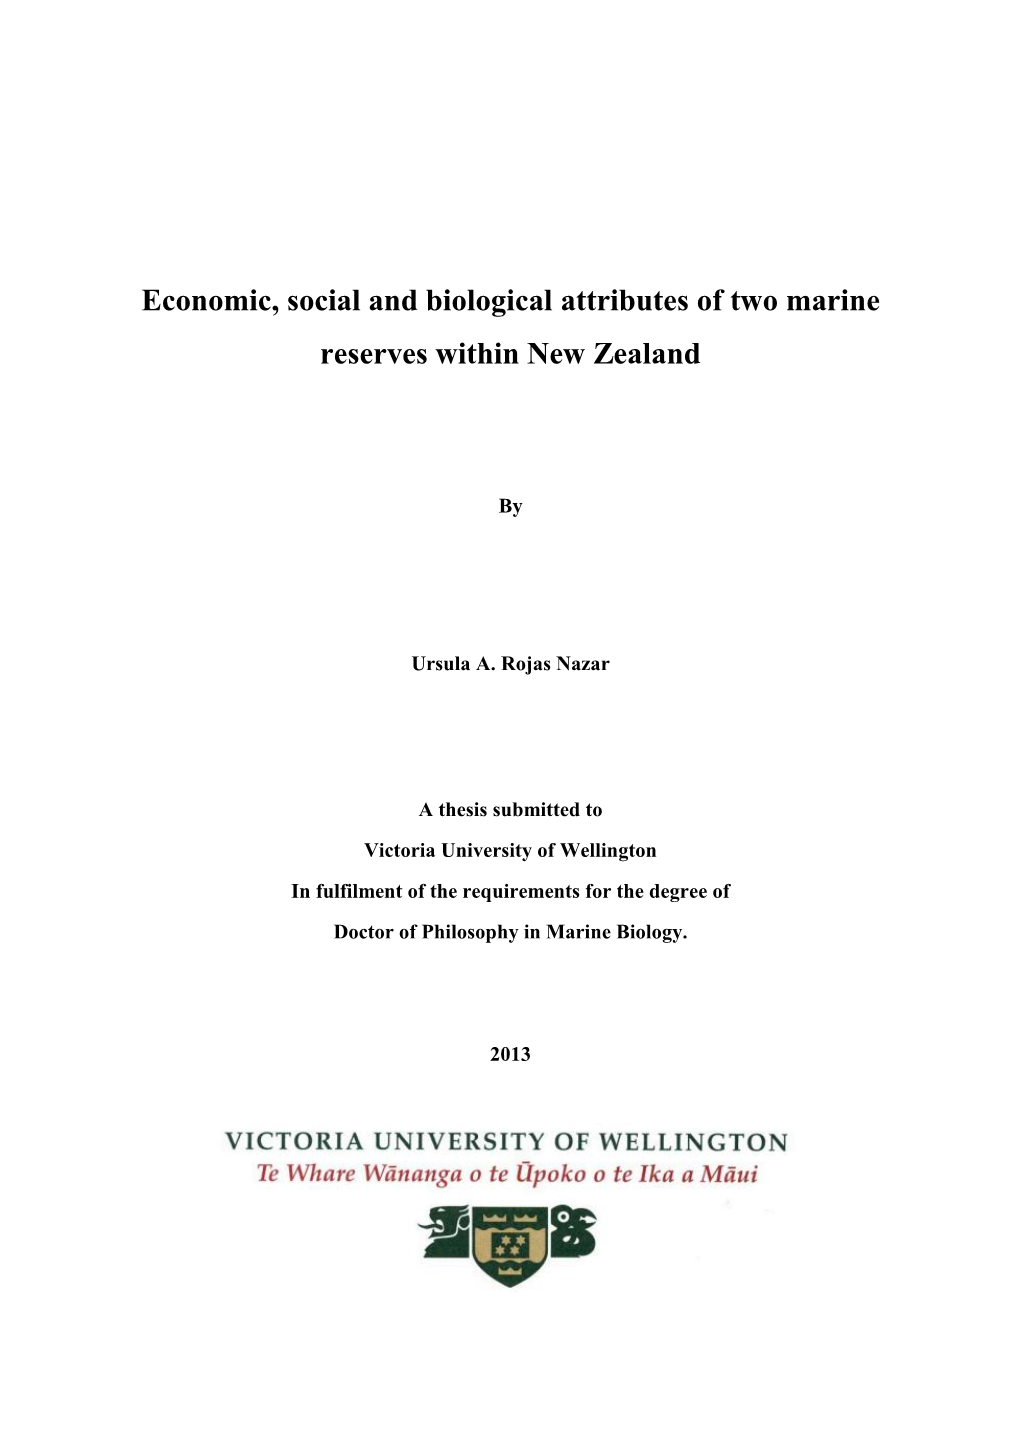 Economic, Social and Biological Attributes of Two Marine Reserves Within New Zealand